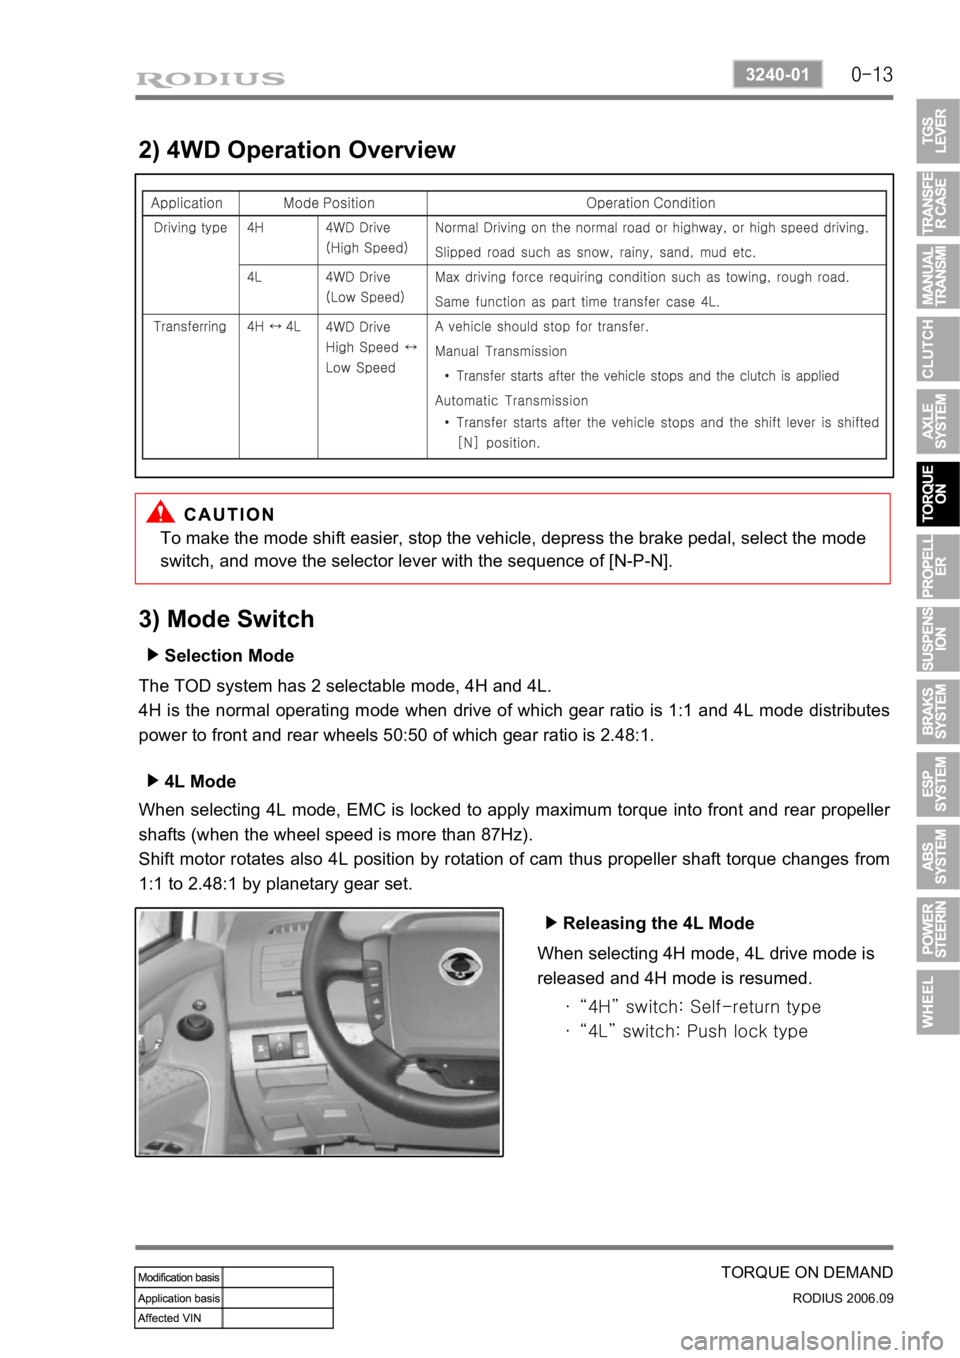 SSANGYONG RODIUS 2007  Service Manual 0-13
TORQUE ON DEMAND
RODIUS 2006.09
3240-01
2) 4WD Operation Overview
To make the mode shift easier, stop the vehicle, depress the brake pedal, select the mode 
switch, and move the selector lever wi